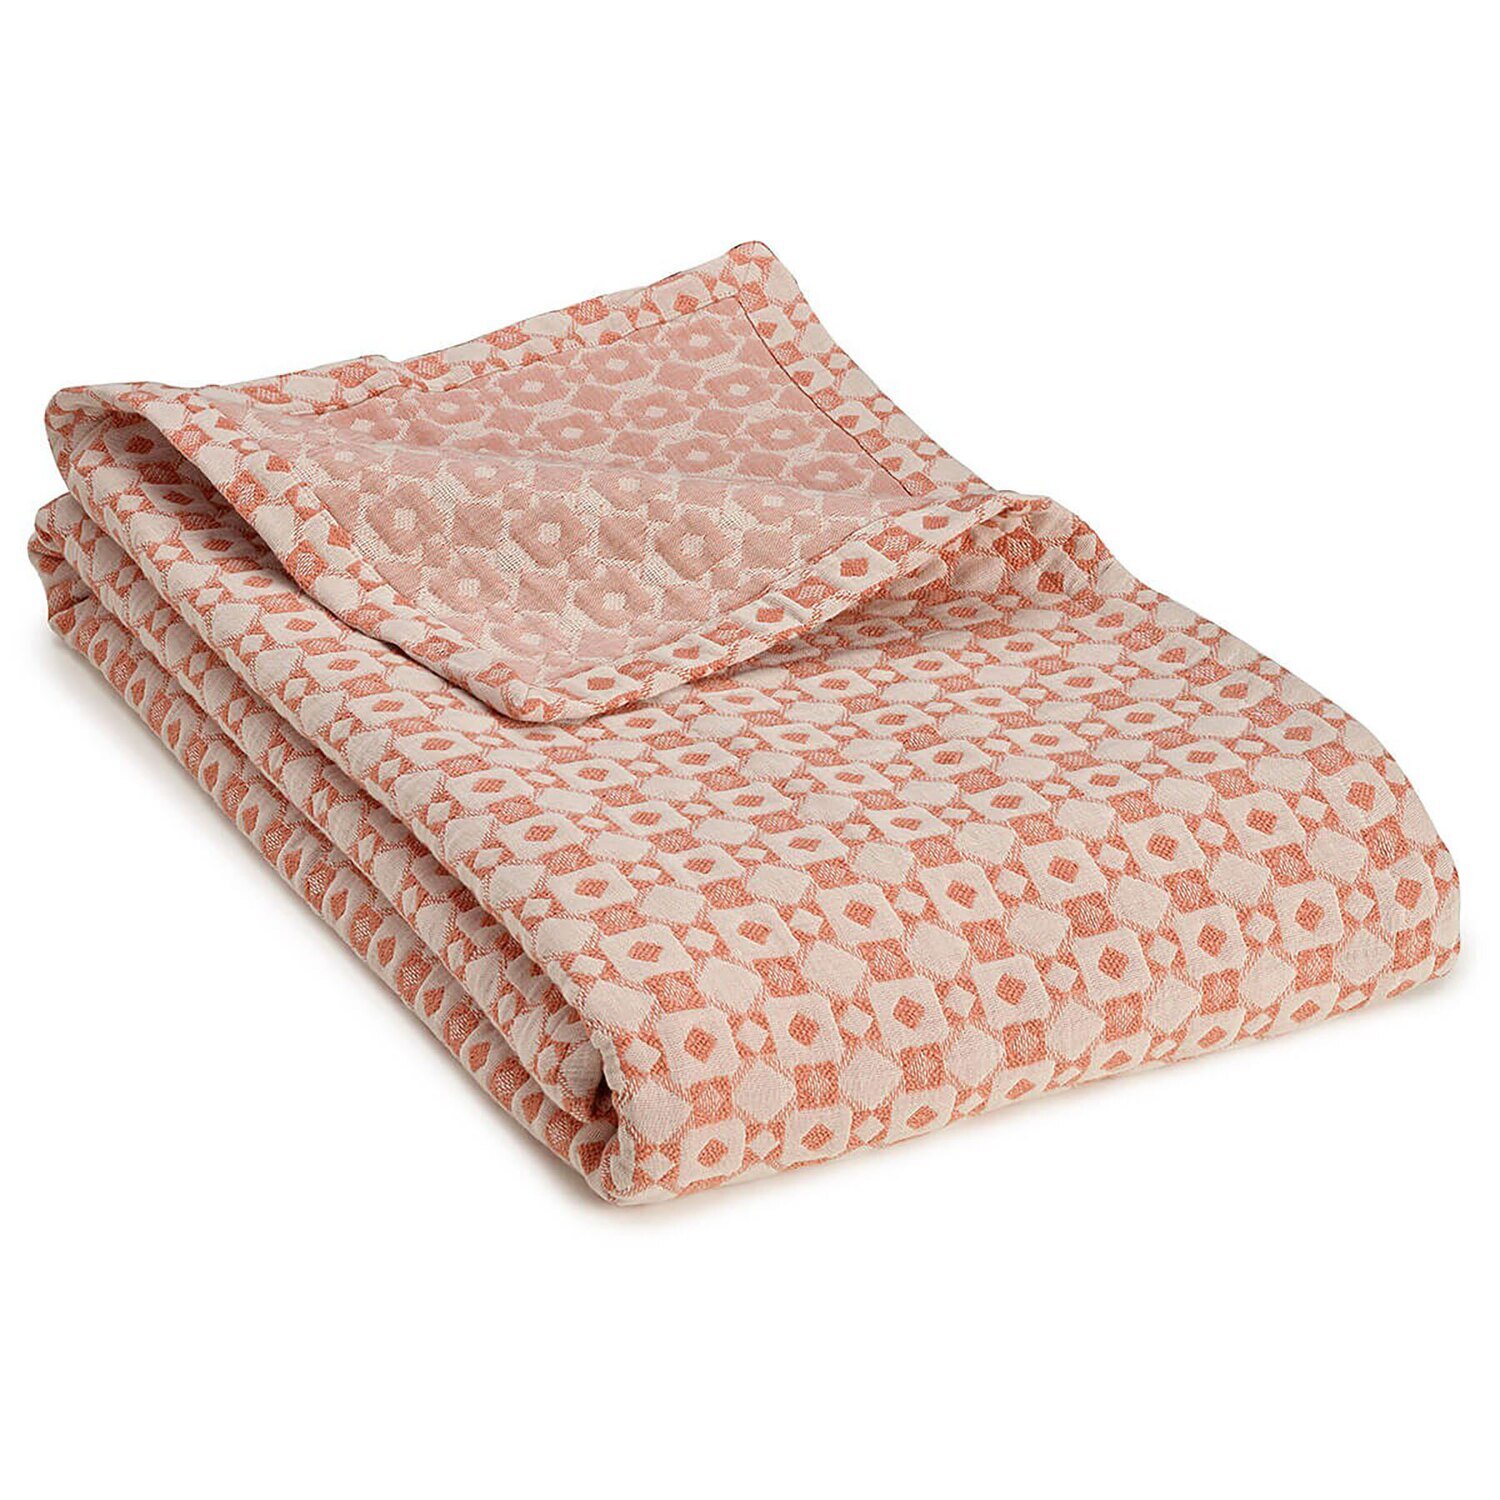 Le Jacquard Throws Obsession Pink 98% Cotton / 2% Polyamide 26352